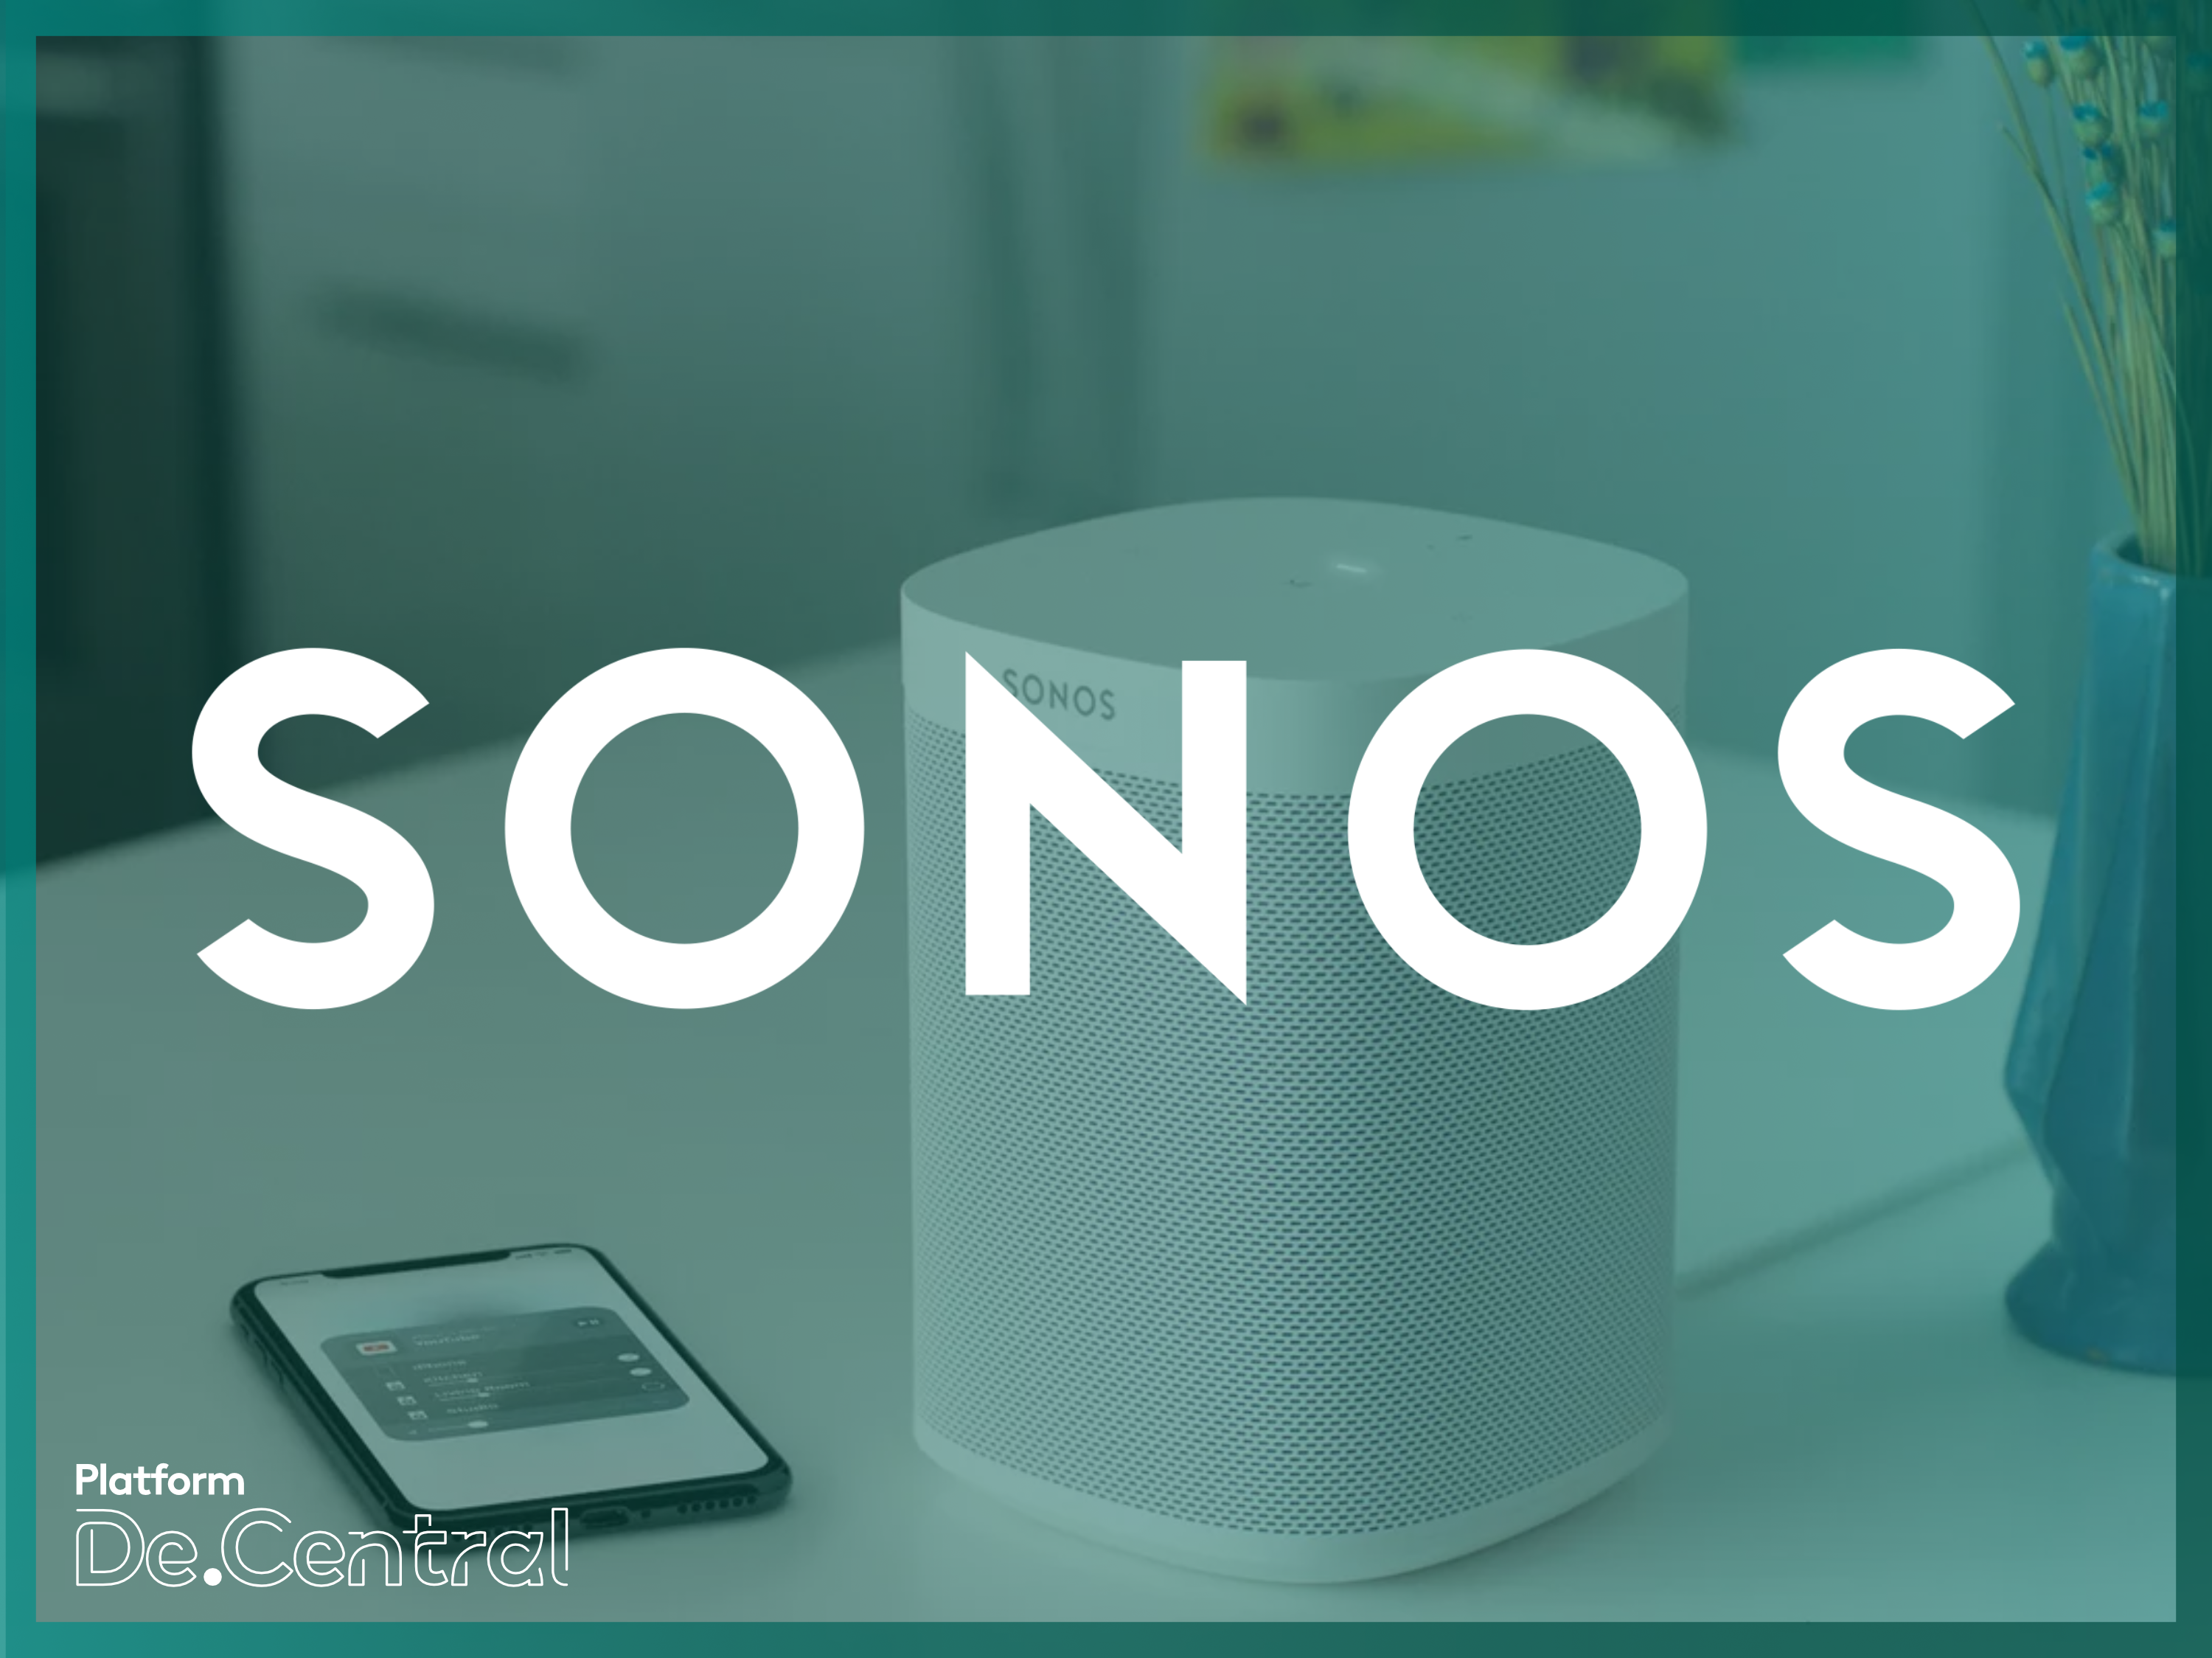 Sonos Radio, curated and original content streaming service